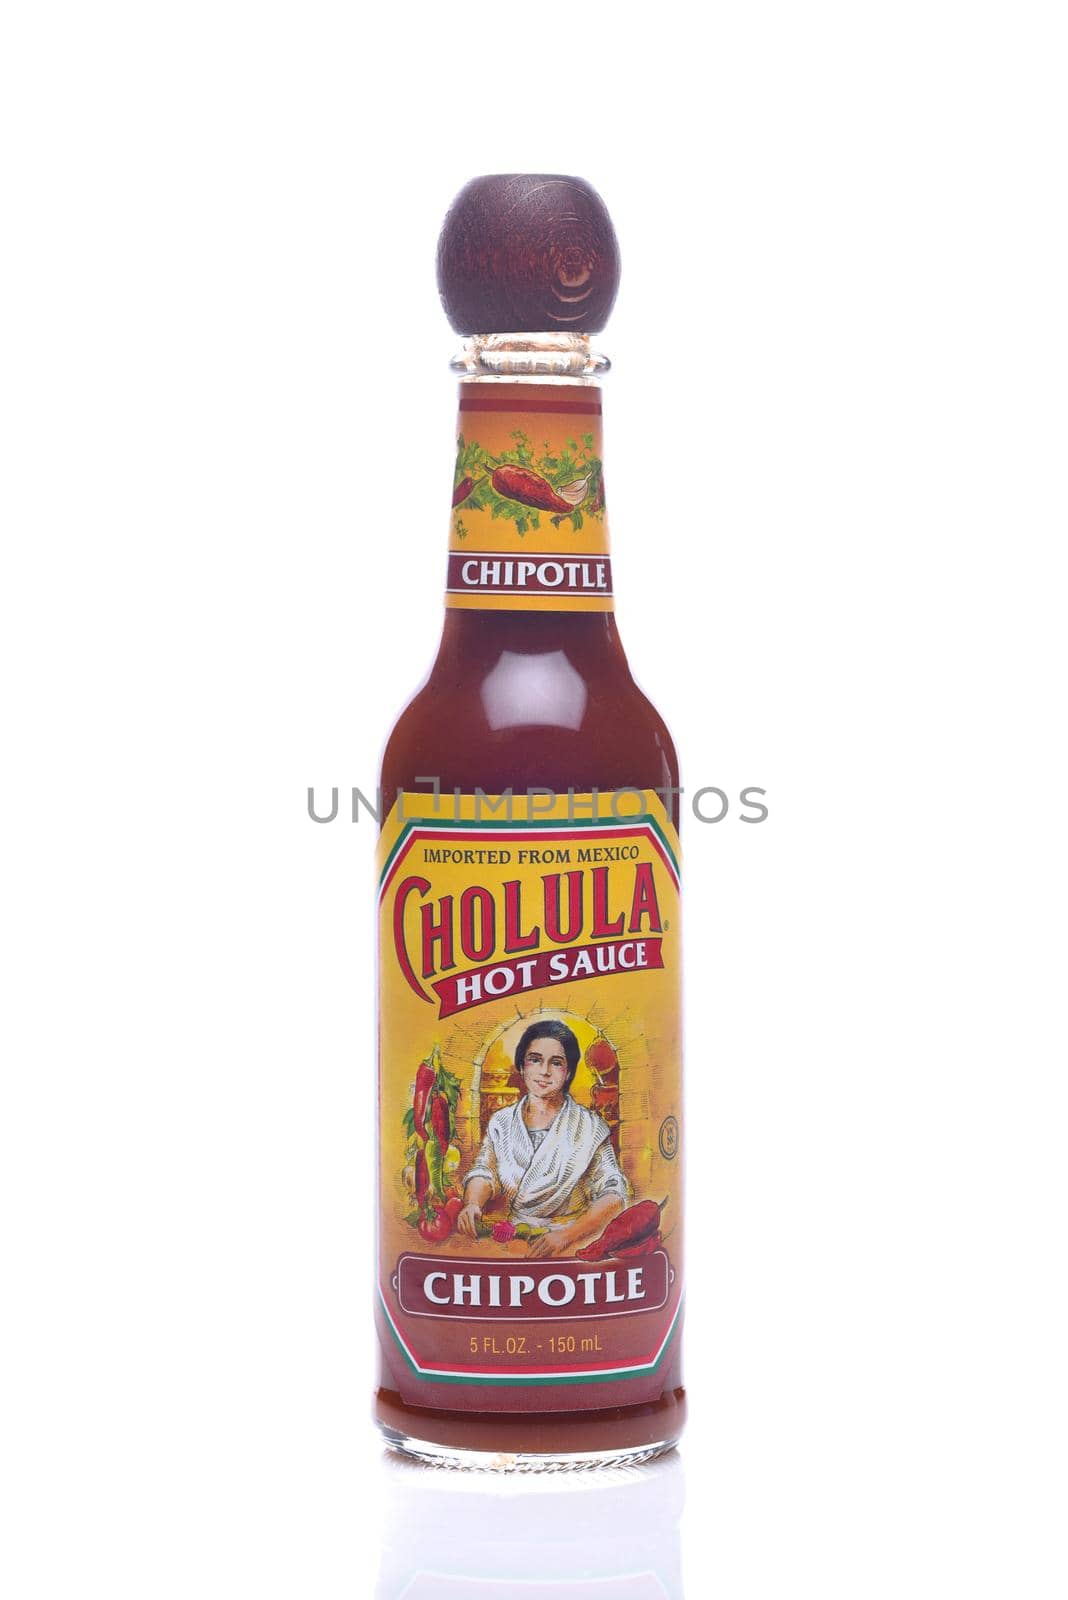 IRVINE, CALIFORNIA - MAY 23, 2018: A bottle of Cholula Chipolte Hot Sauce. A chili-based hot sauce, manufactured in Chapala, Jalisco, Mexico, and licensed by Jose Cuervo.